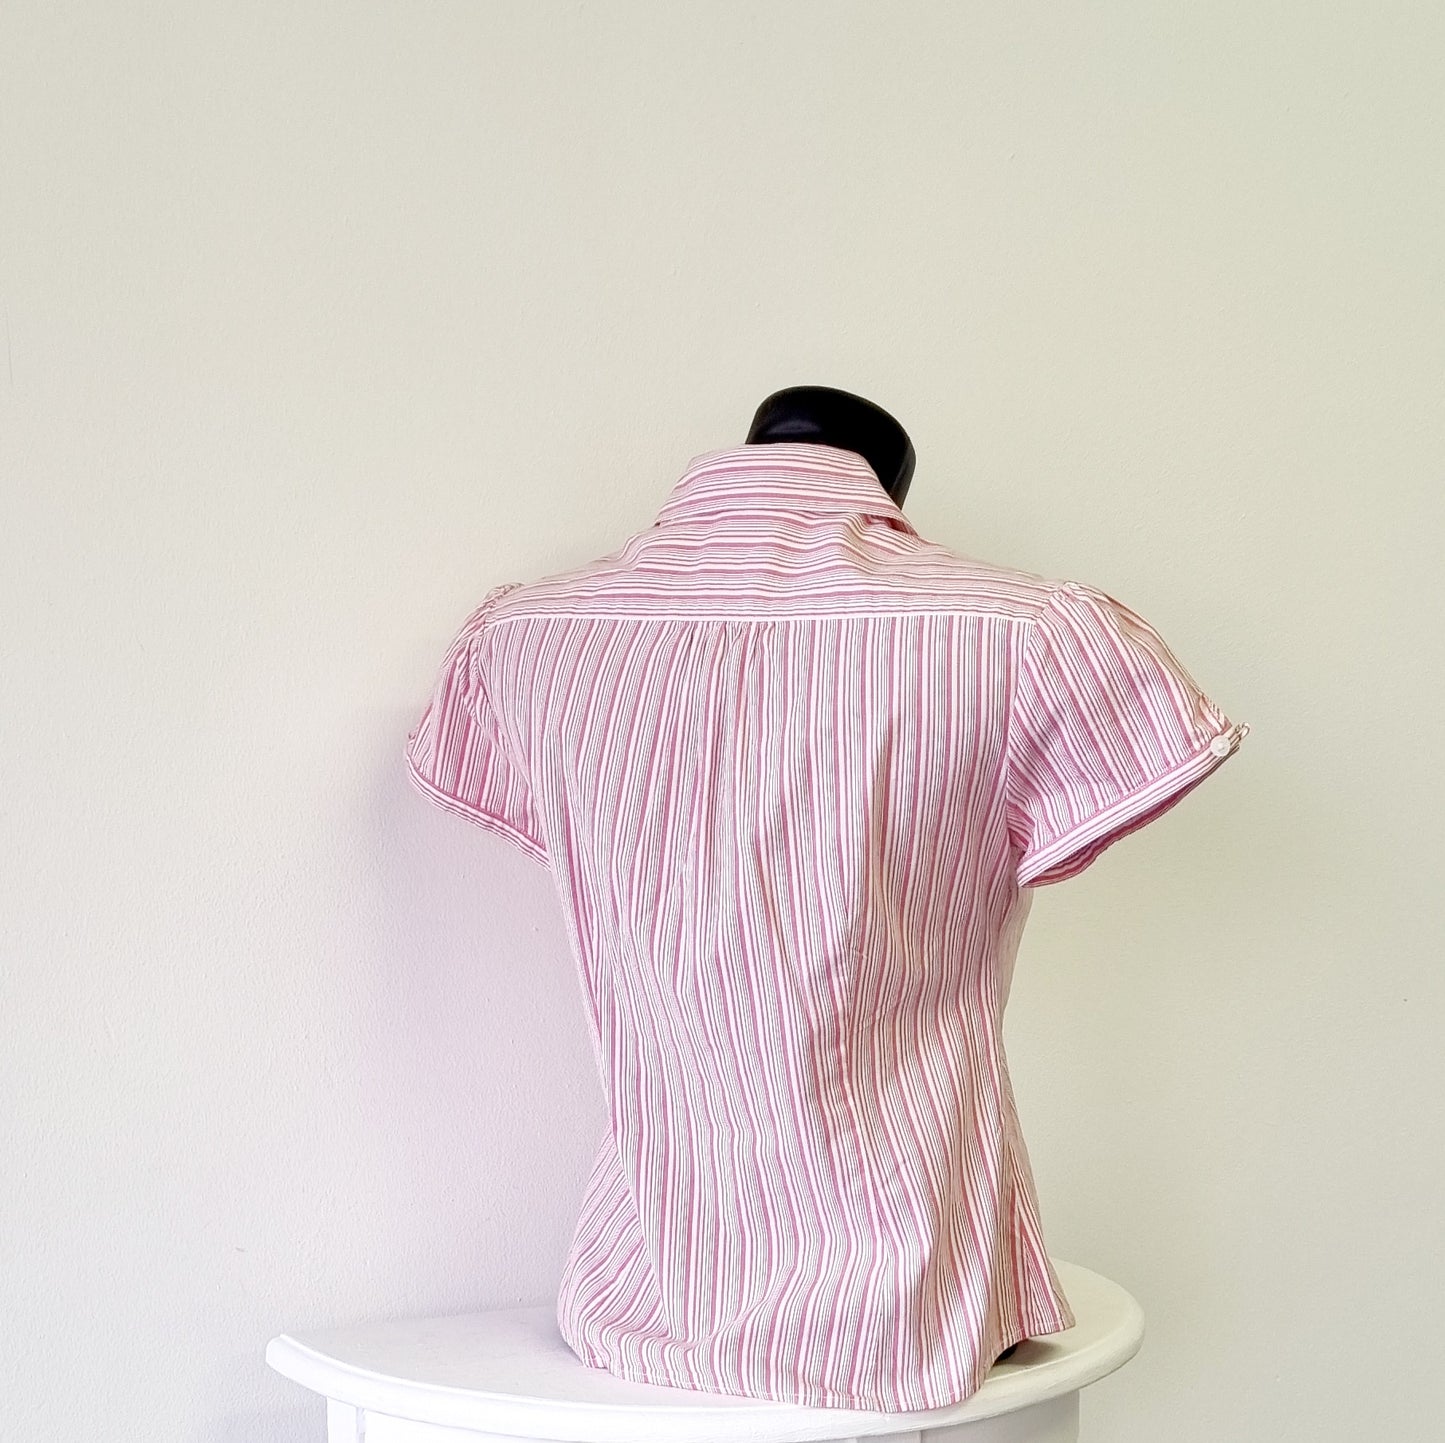 Kelso - Vintage Pink Candy striped cotton short sleeve shirt